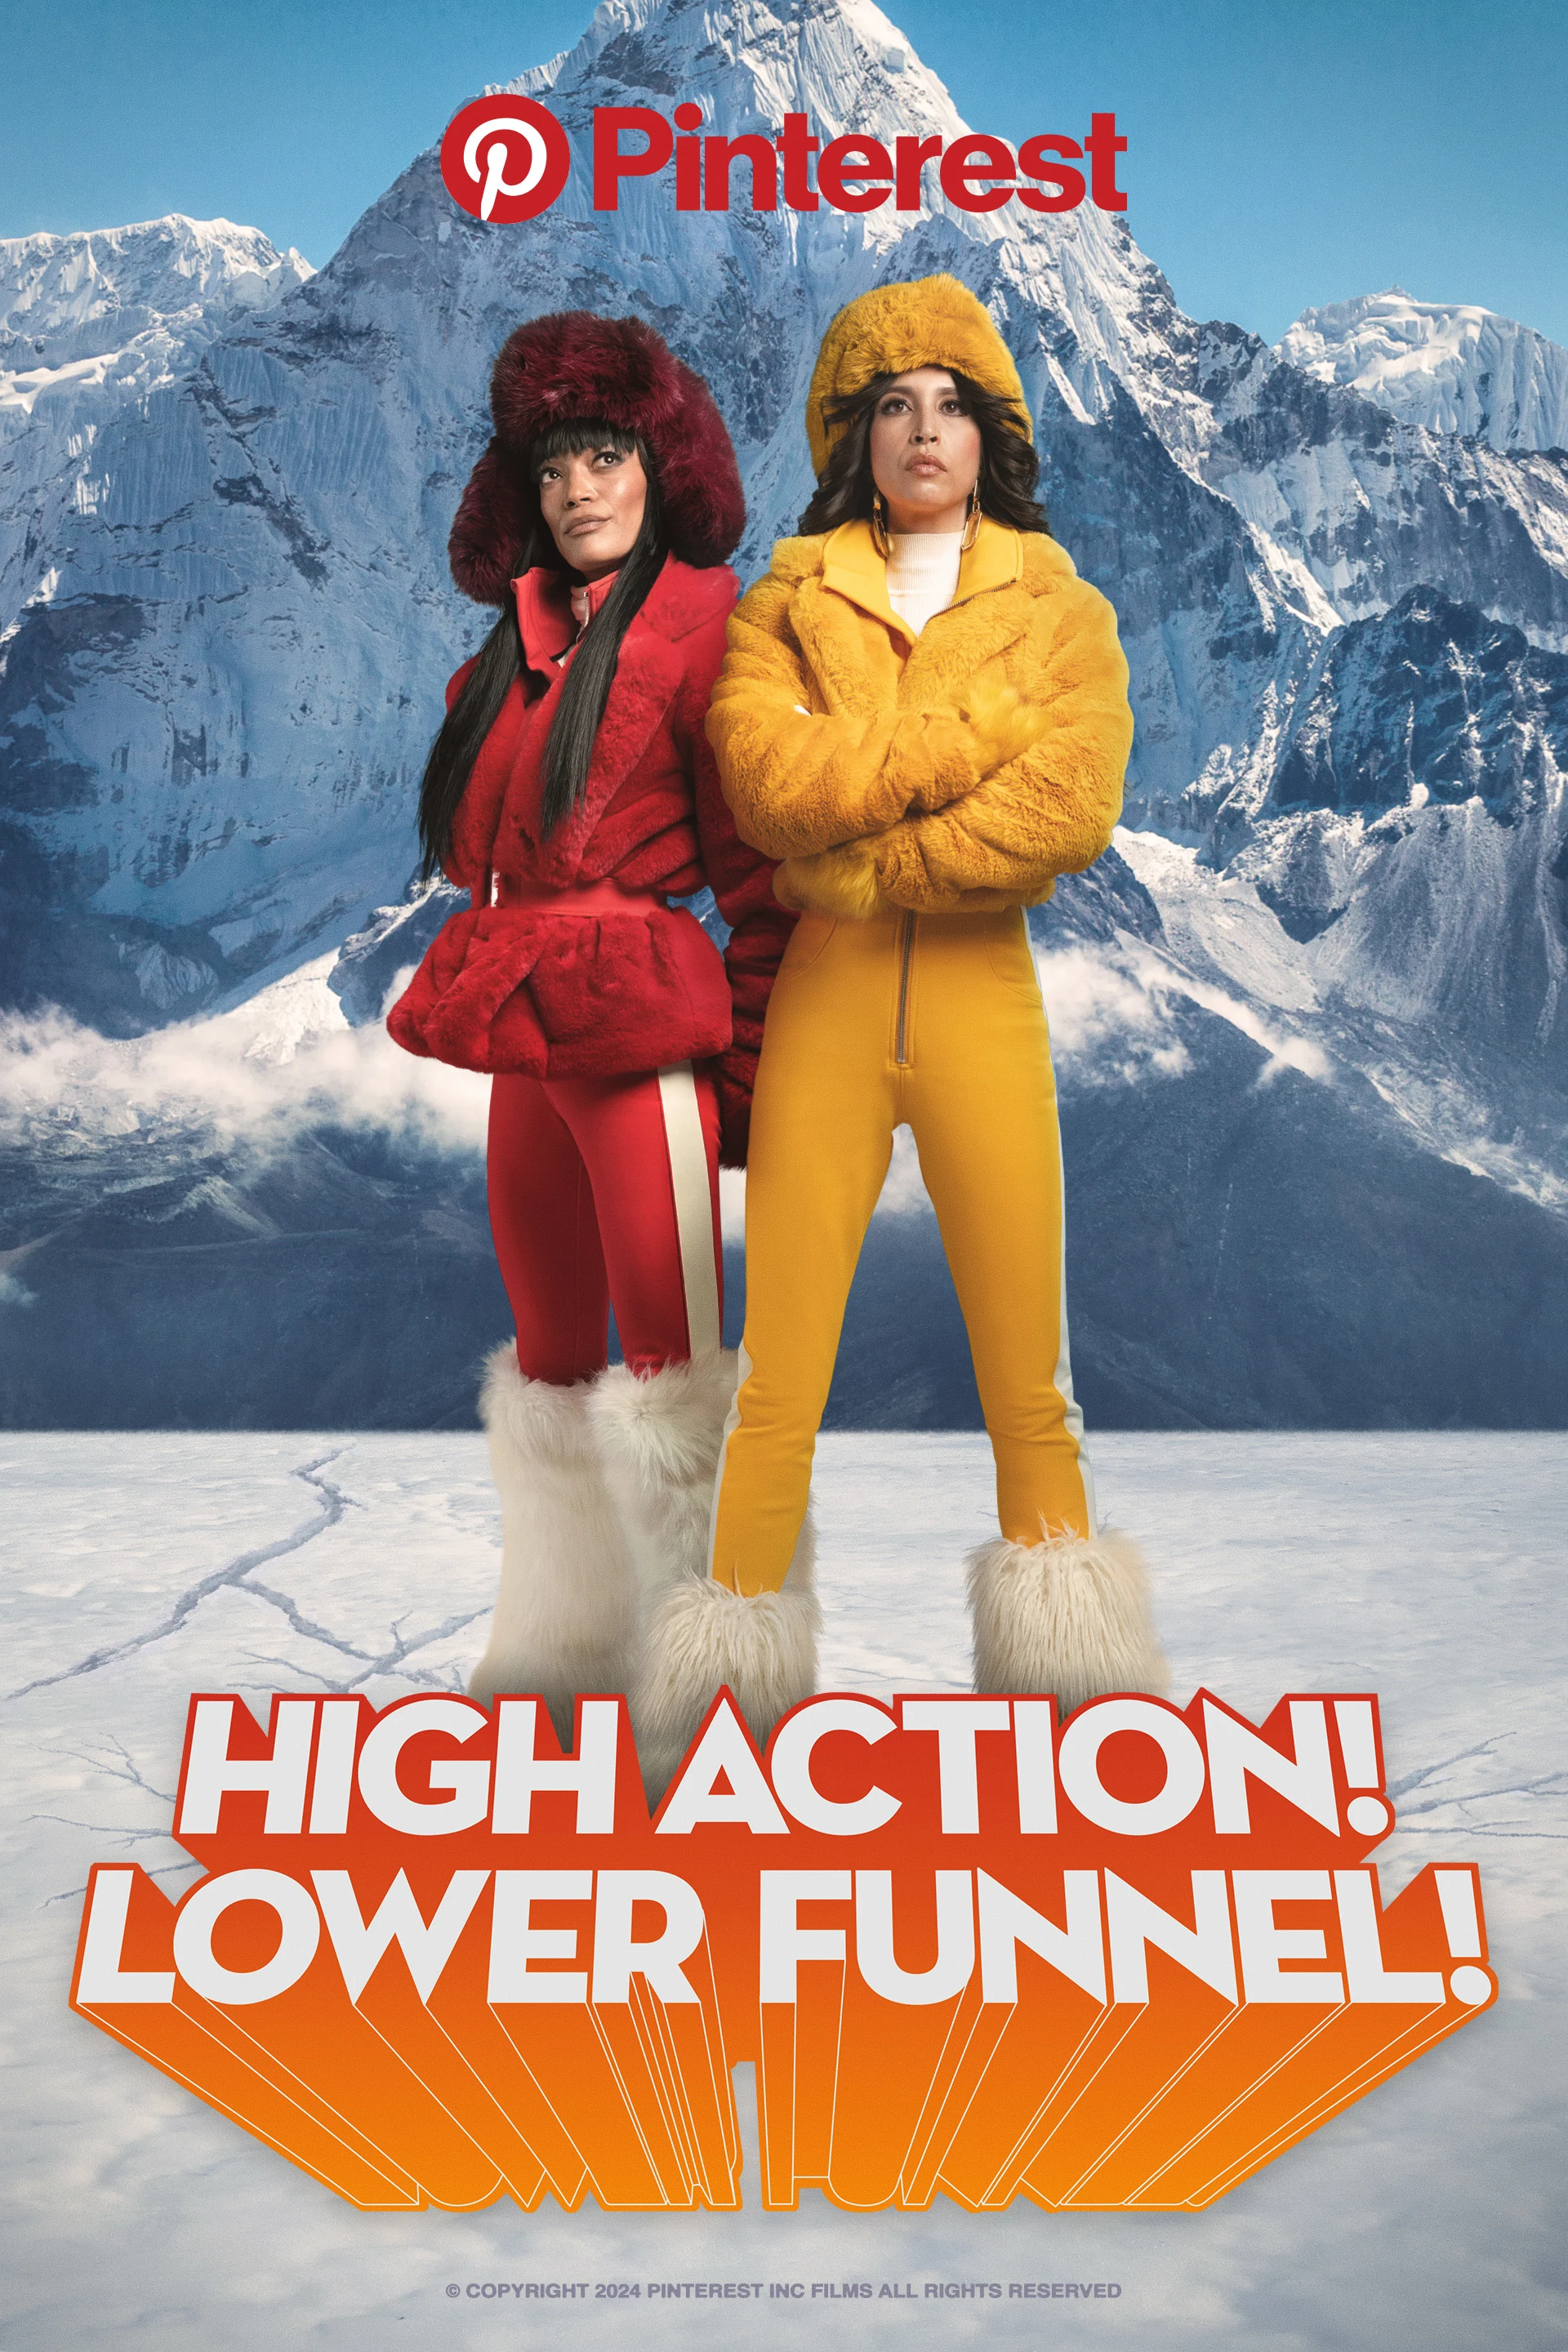 A movie poster depicts two women in colorful jumpsuits in front of a snowy mountain. The phrase "High action! Lower funnel!" is displayed in bold font. 